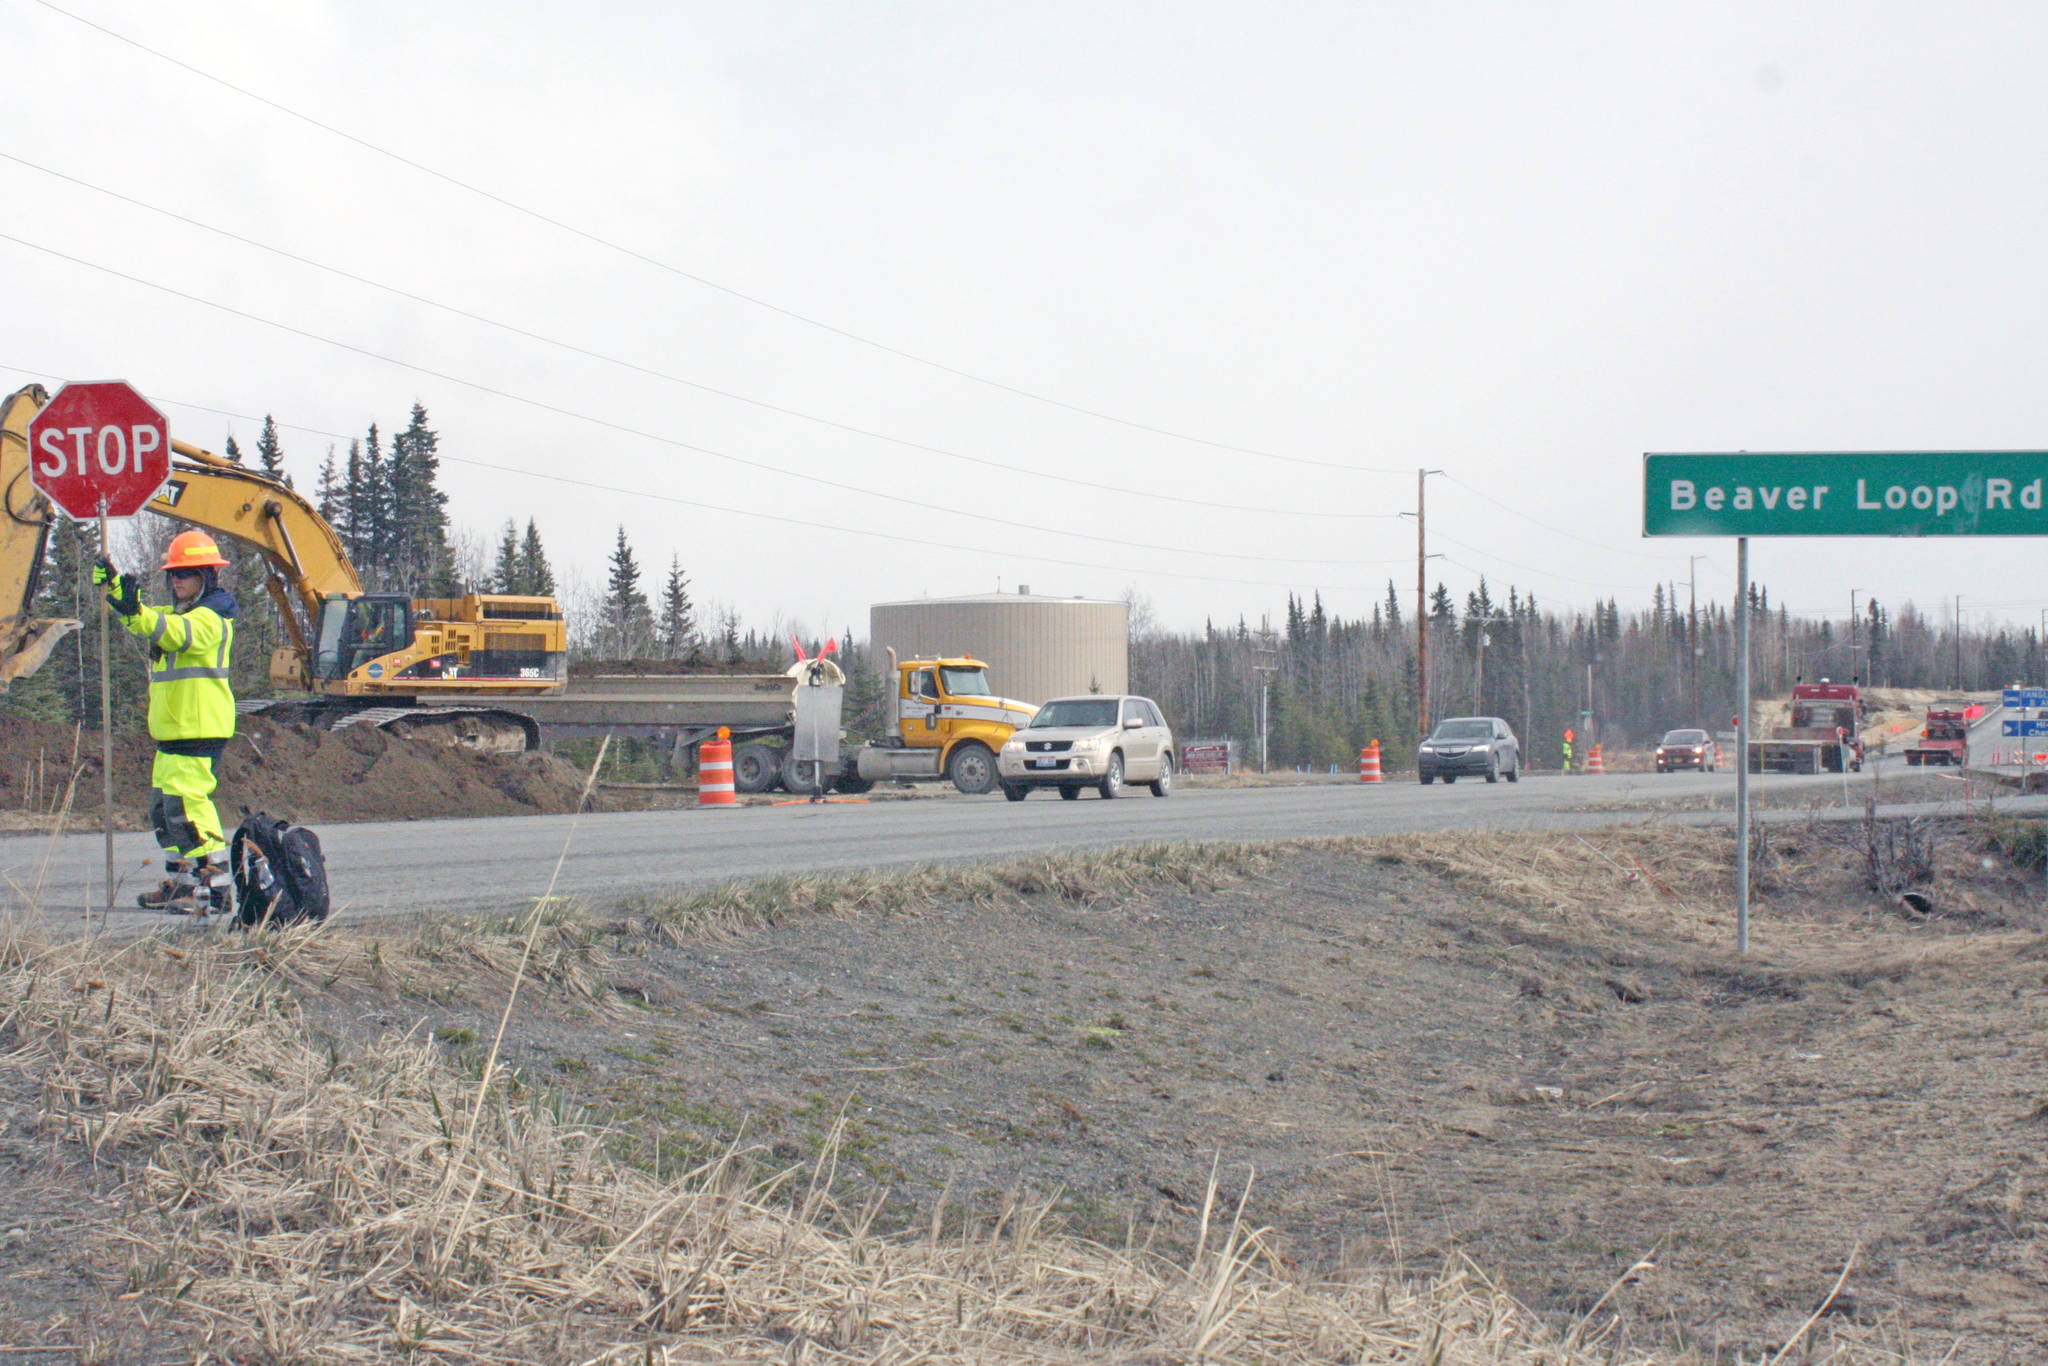 A construction worker directs traffic near the intersection of the Kenai Spur Highway and Beaver Loop Road on Tuesday, April 23, 2019, in Kenai, Alaska. Construction work on multiple roads will continue through the summer. (Photo by Erin Thompson/Peninsula Clarion)